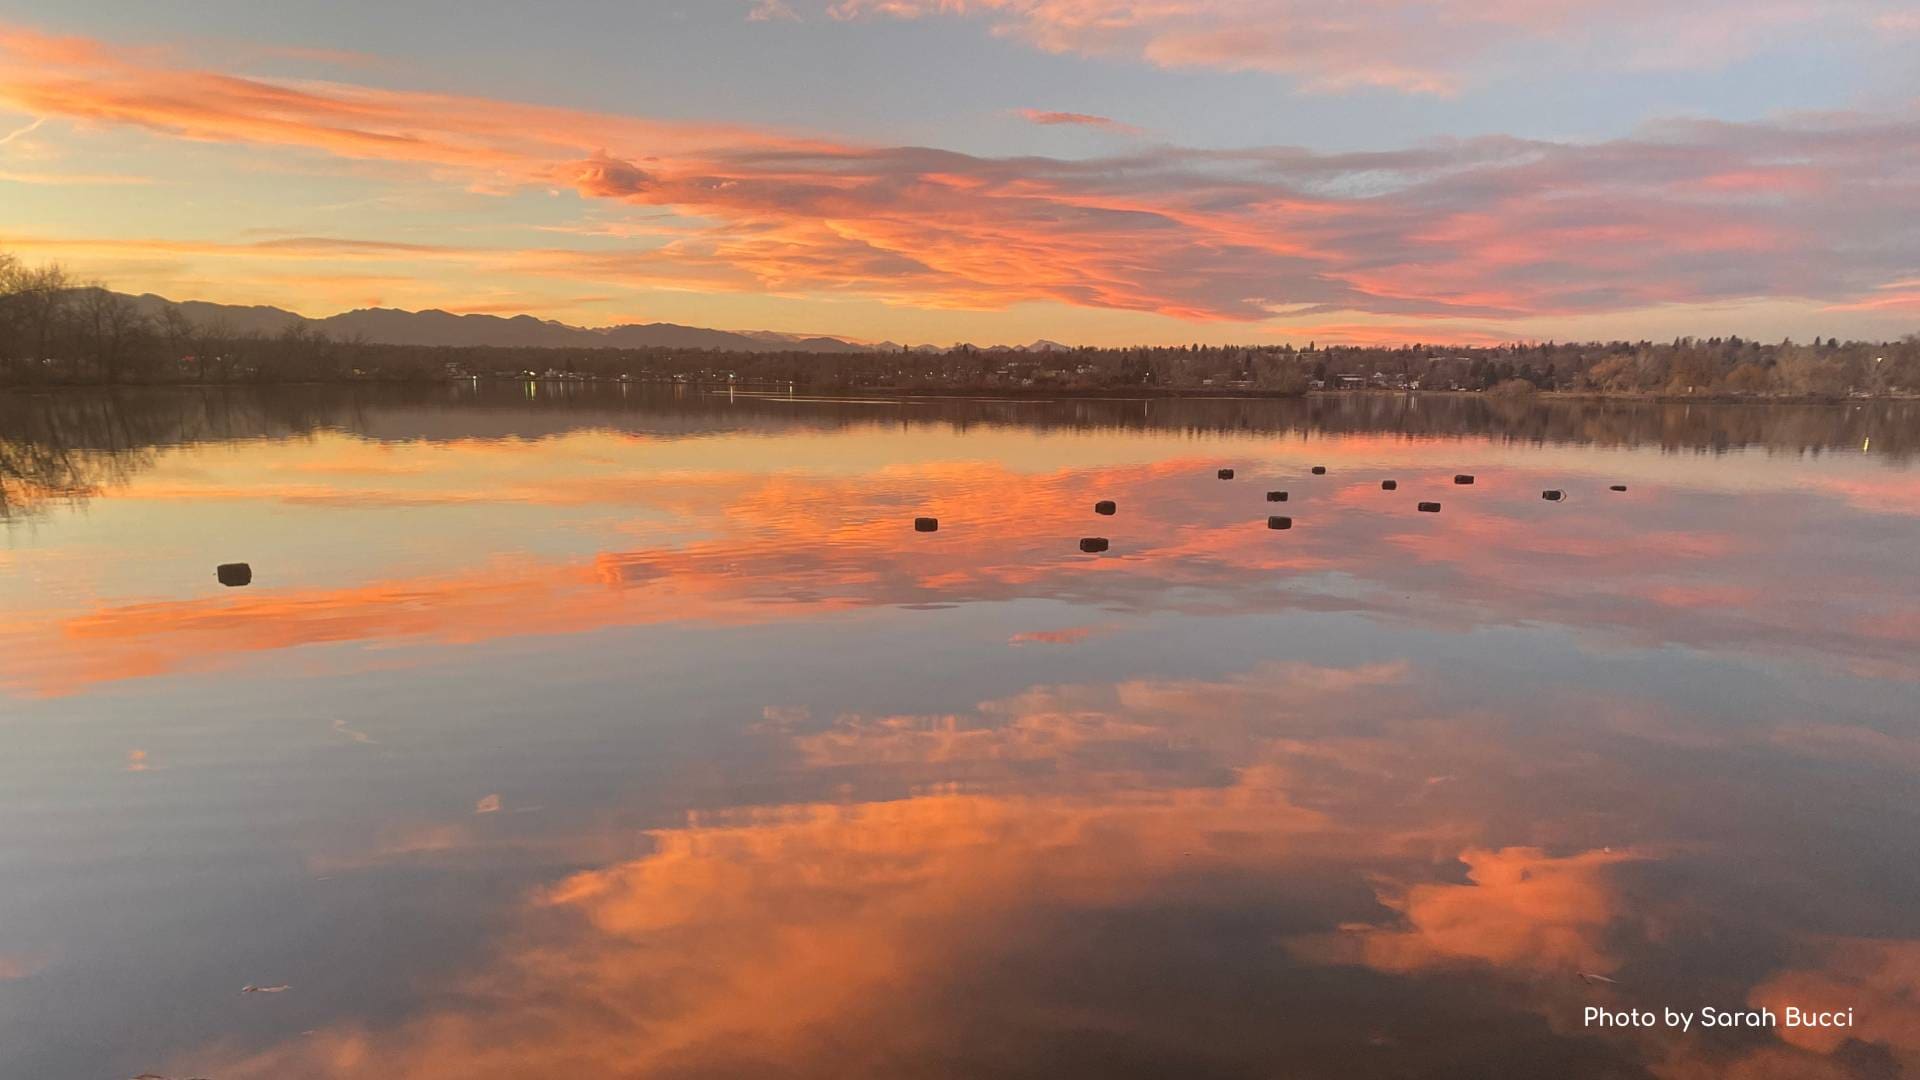 Photograph of a sunset over a lake with bright pink and orange clouds reflected in the water.